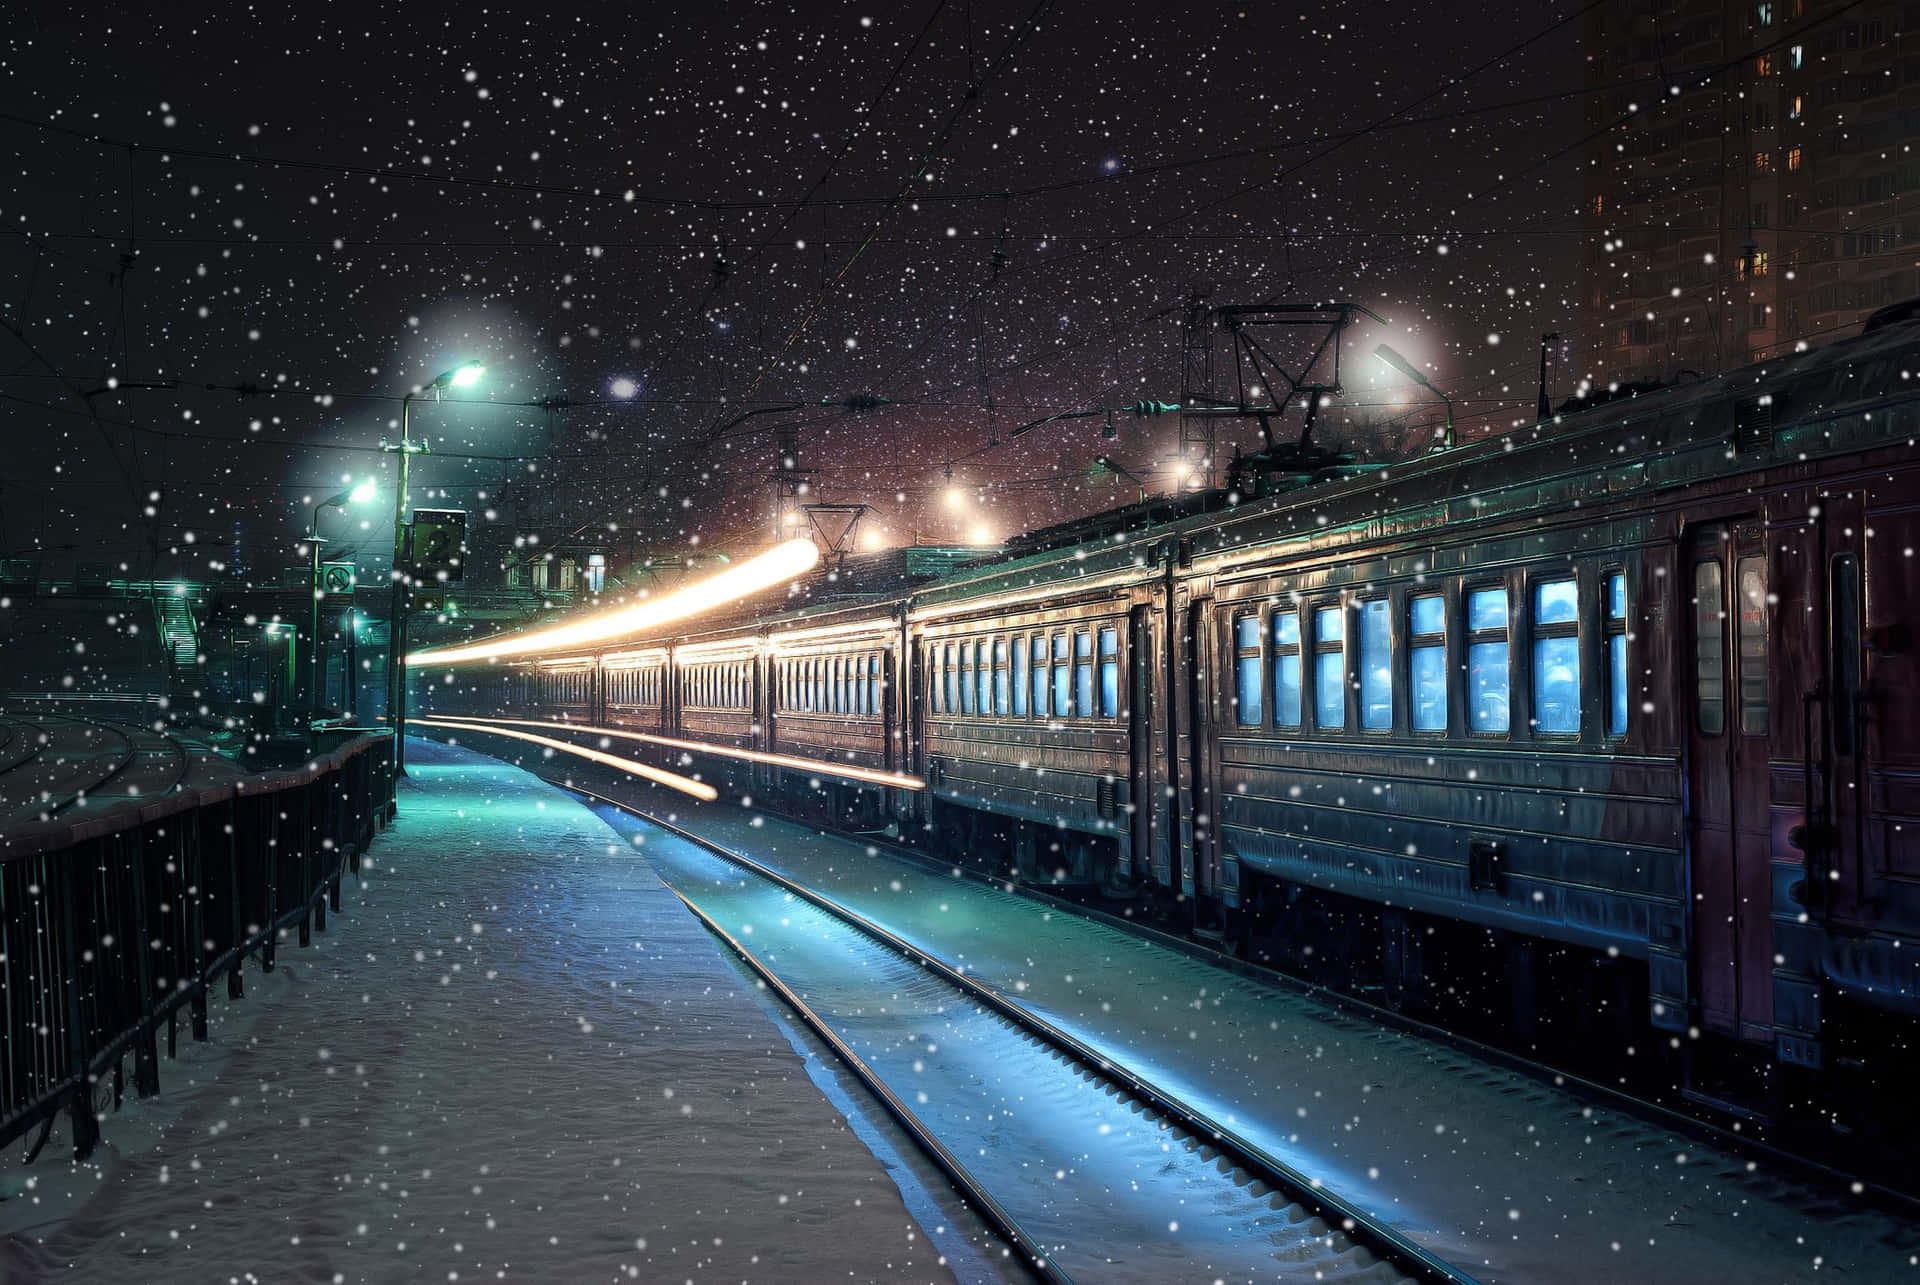 Experience the magic of Christmas with Polar Express